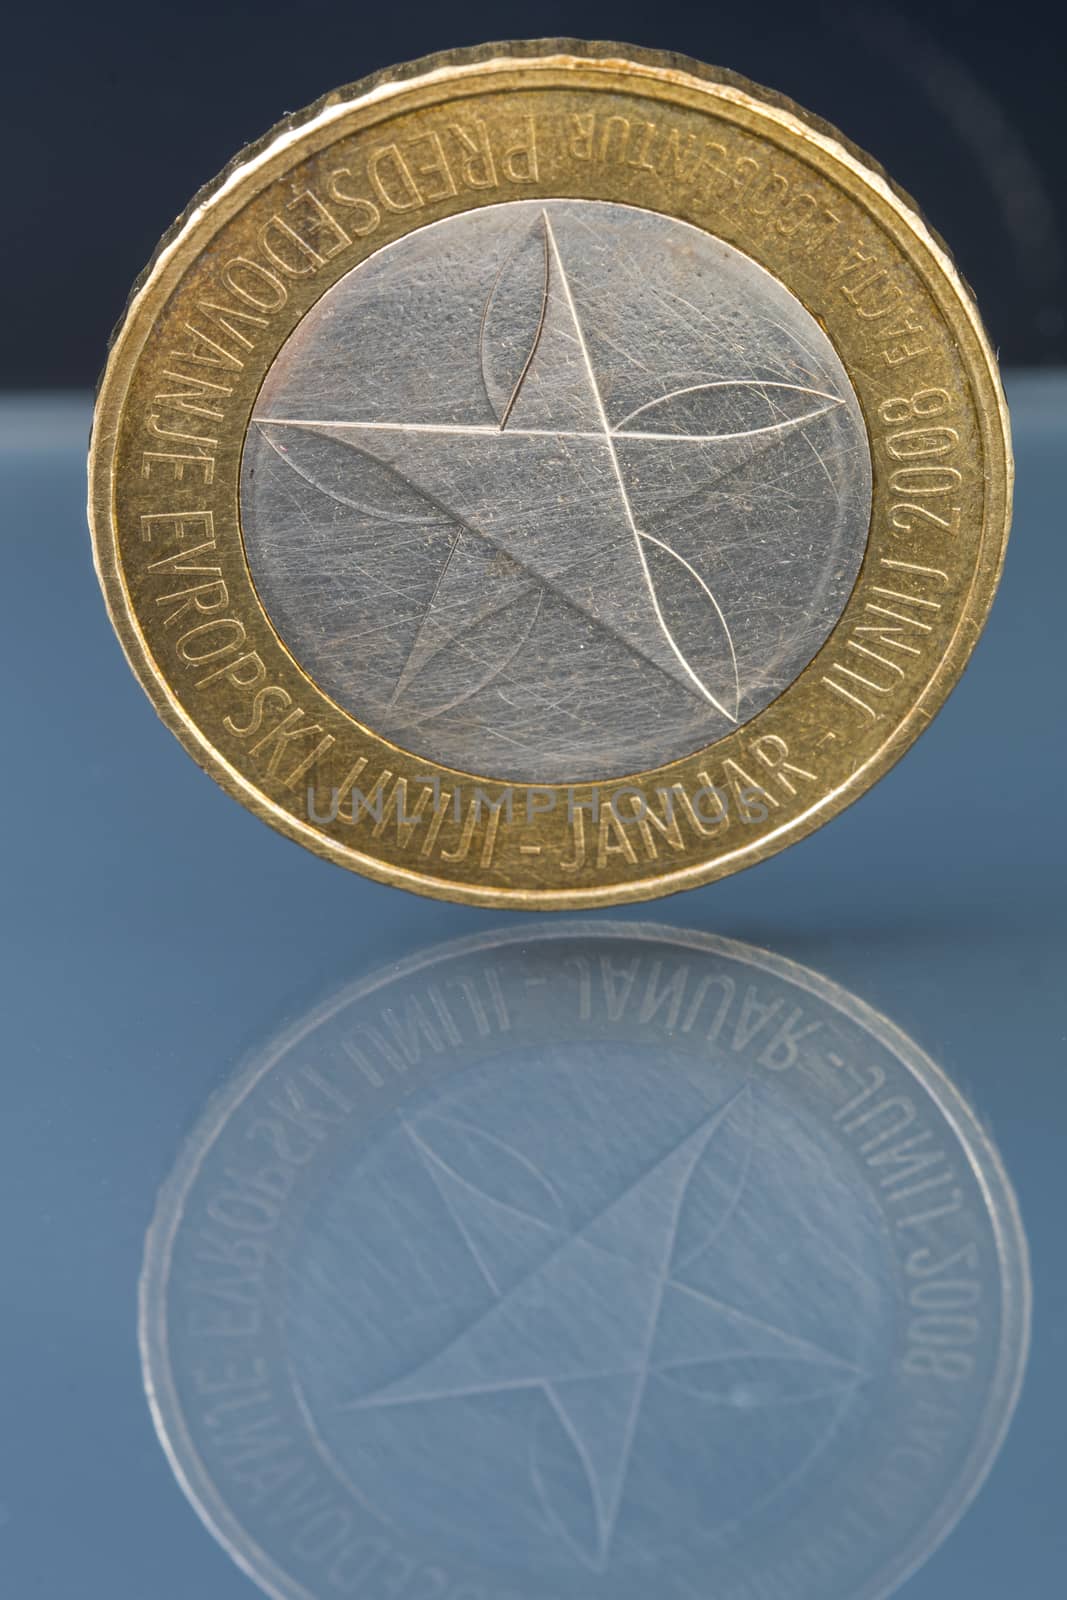 Rare limited edition three 3 Euro coin issued by Slovenia celebrating it's first presidency of European union from January to June 2008